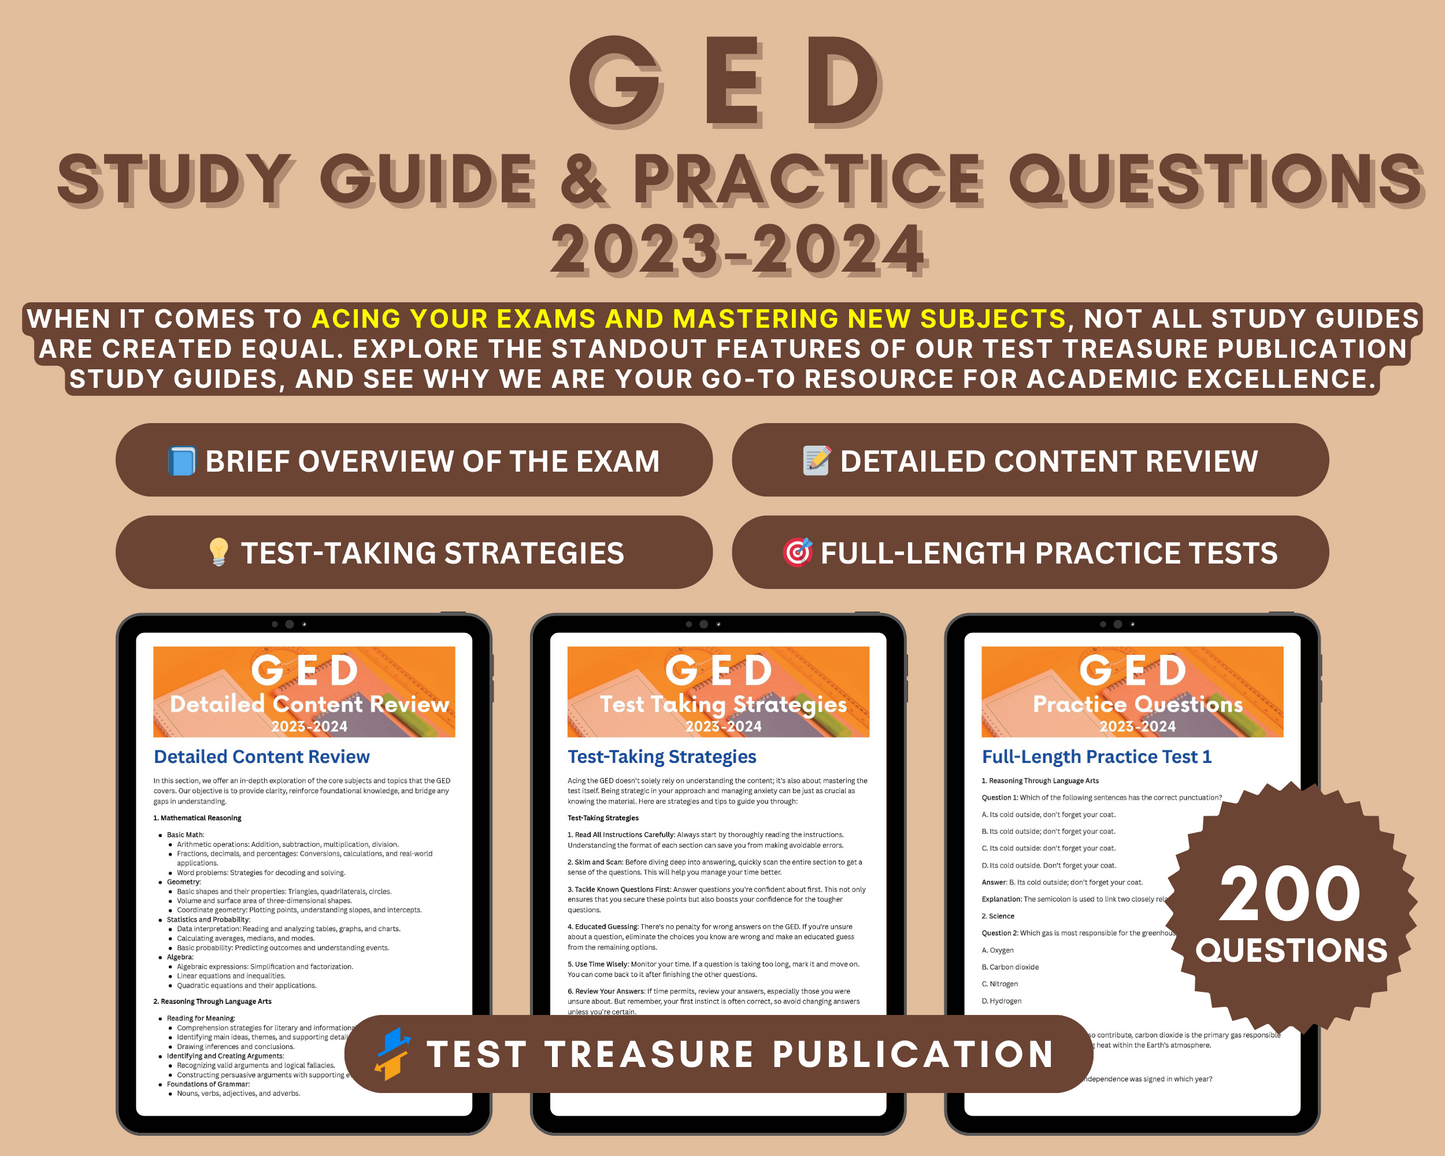 GED Exam Study Guide 2023-2024 | GED Test Prep | Math, Language Arts, Science, Social Studies | Practice Questions & Test-Taking Strategies